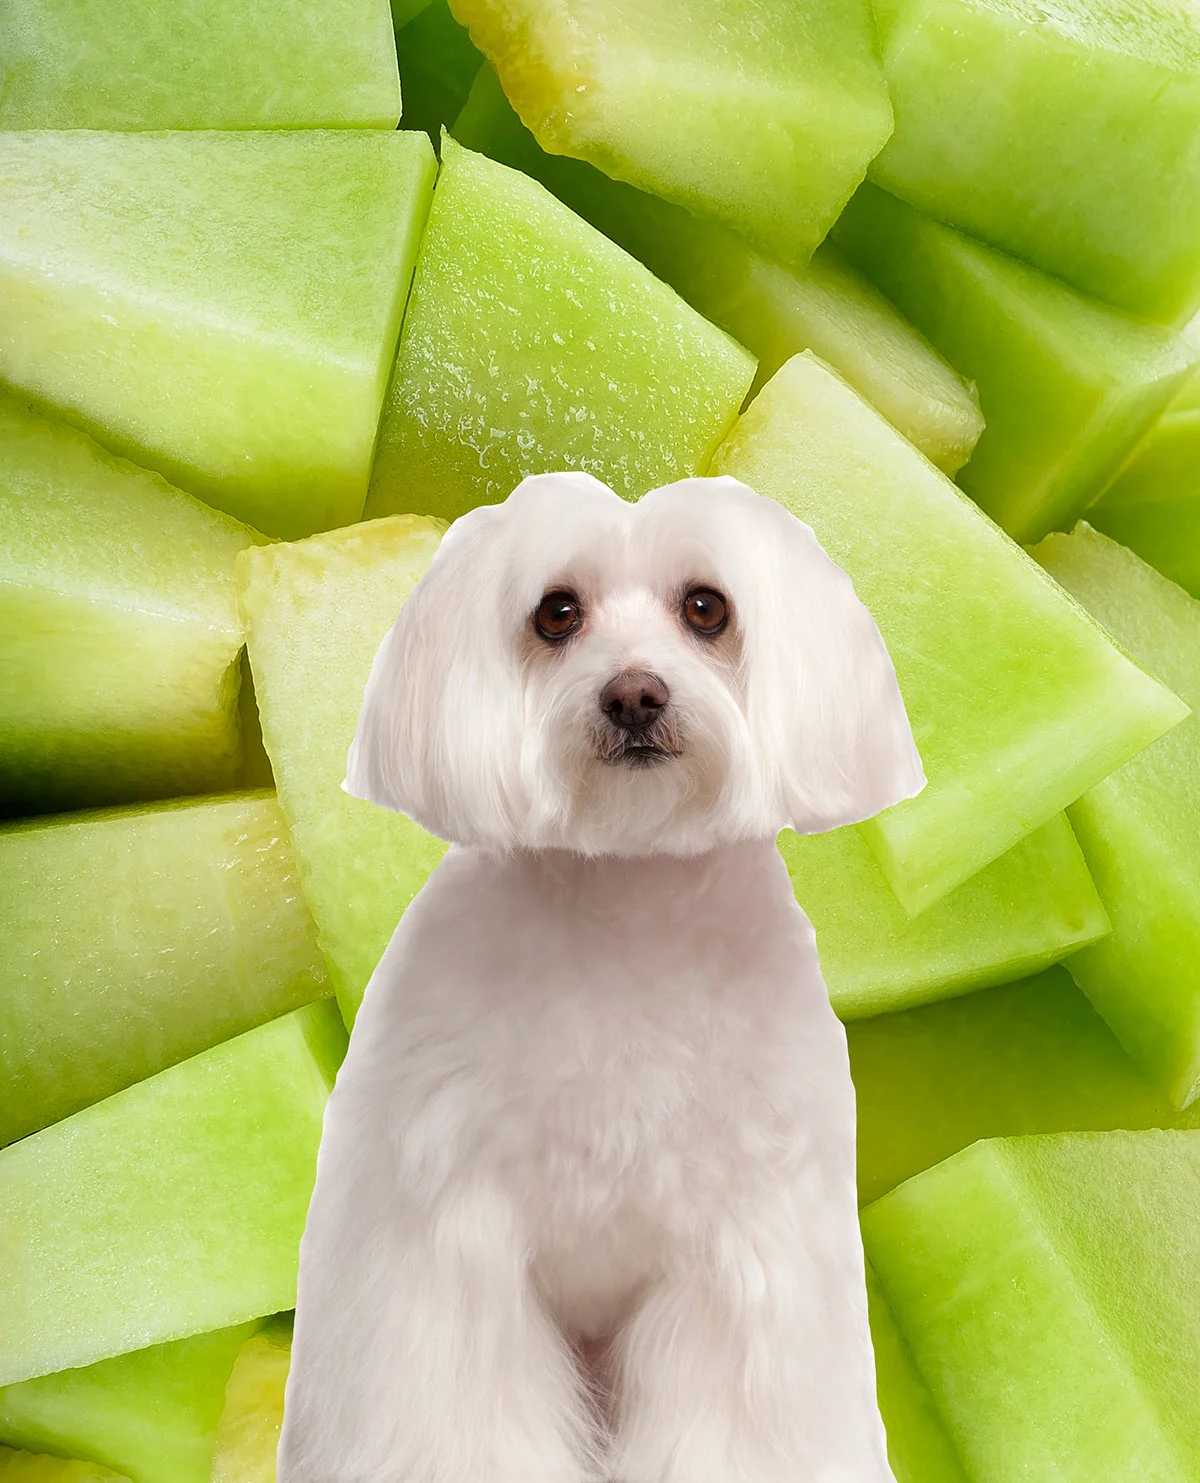 A white dog with a pile of honeydew melon.